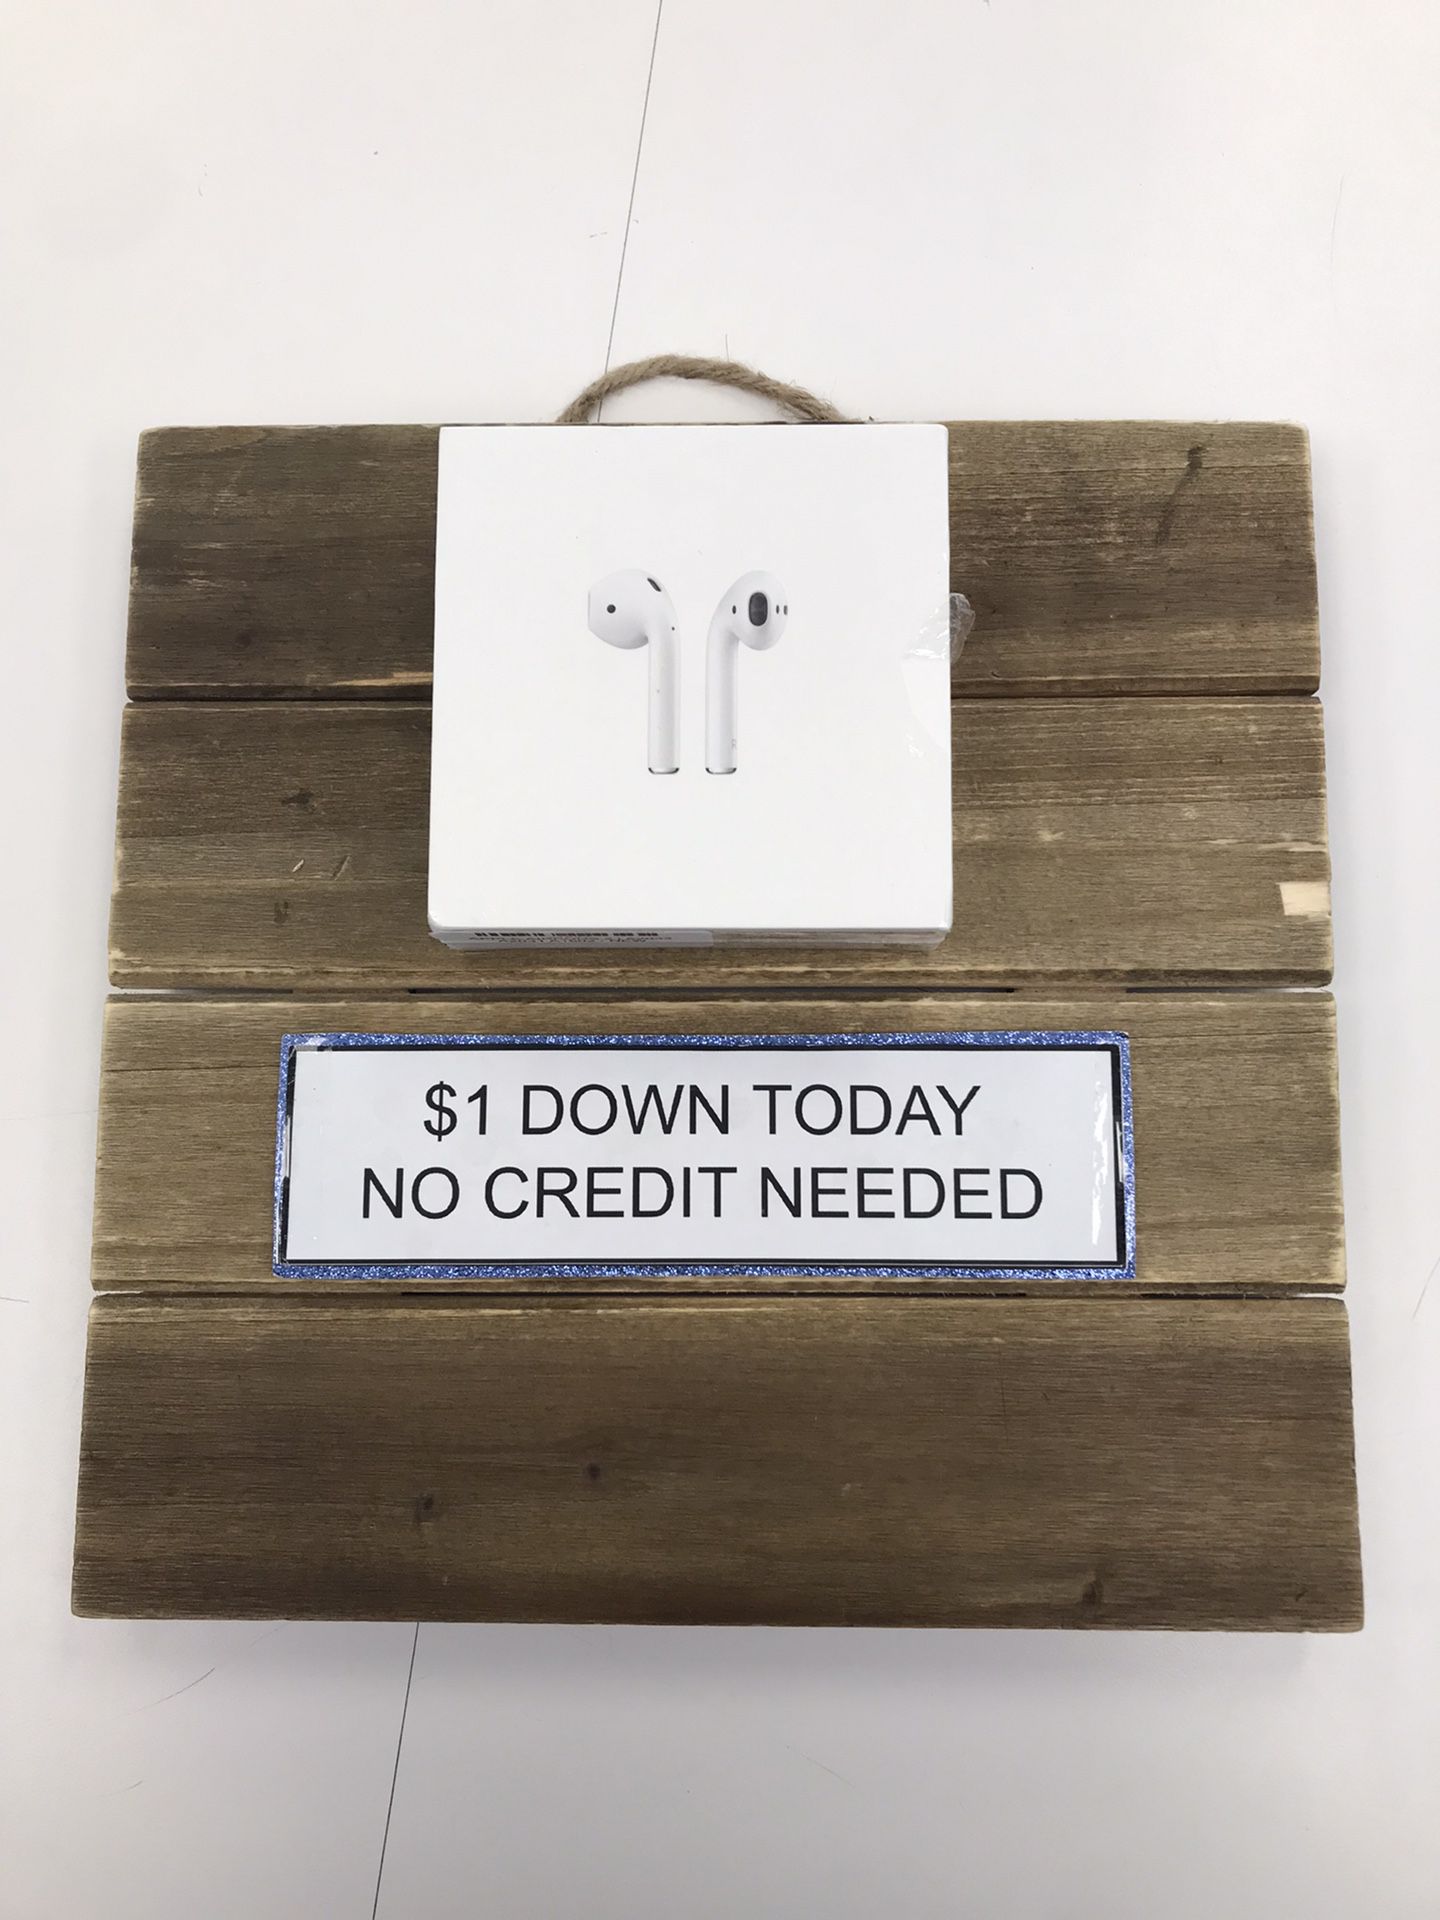 Apple Airpods 2gen Bluetooth Earbuds - Pay $1 Today to Take it Home and Pay the Rest Later!